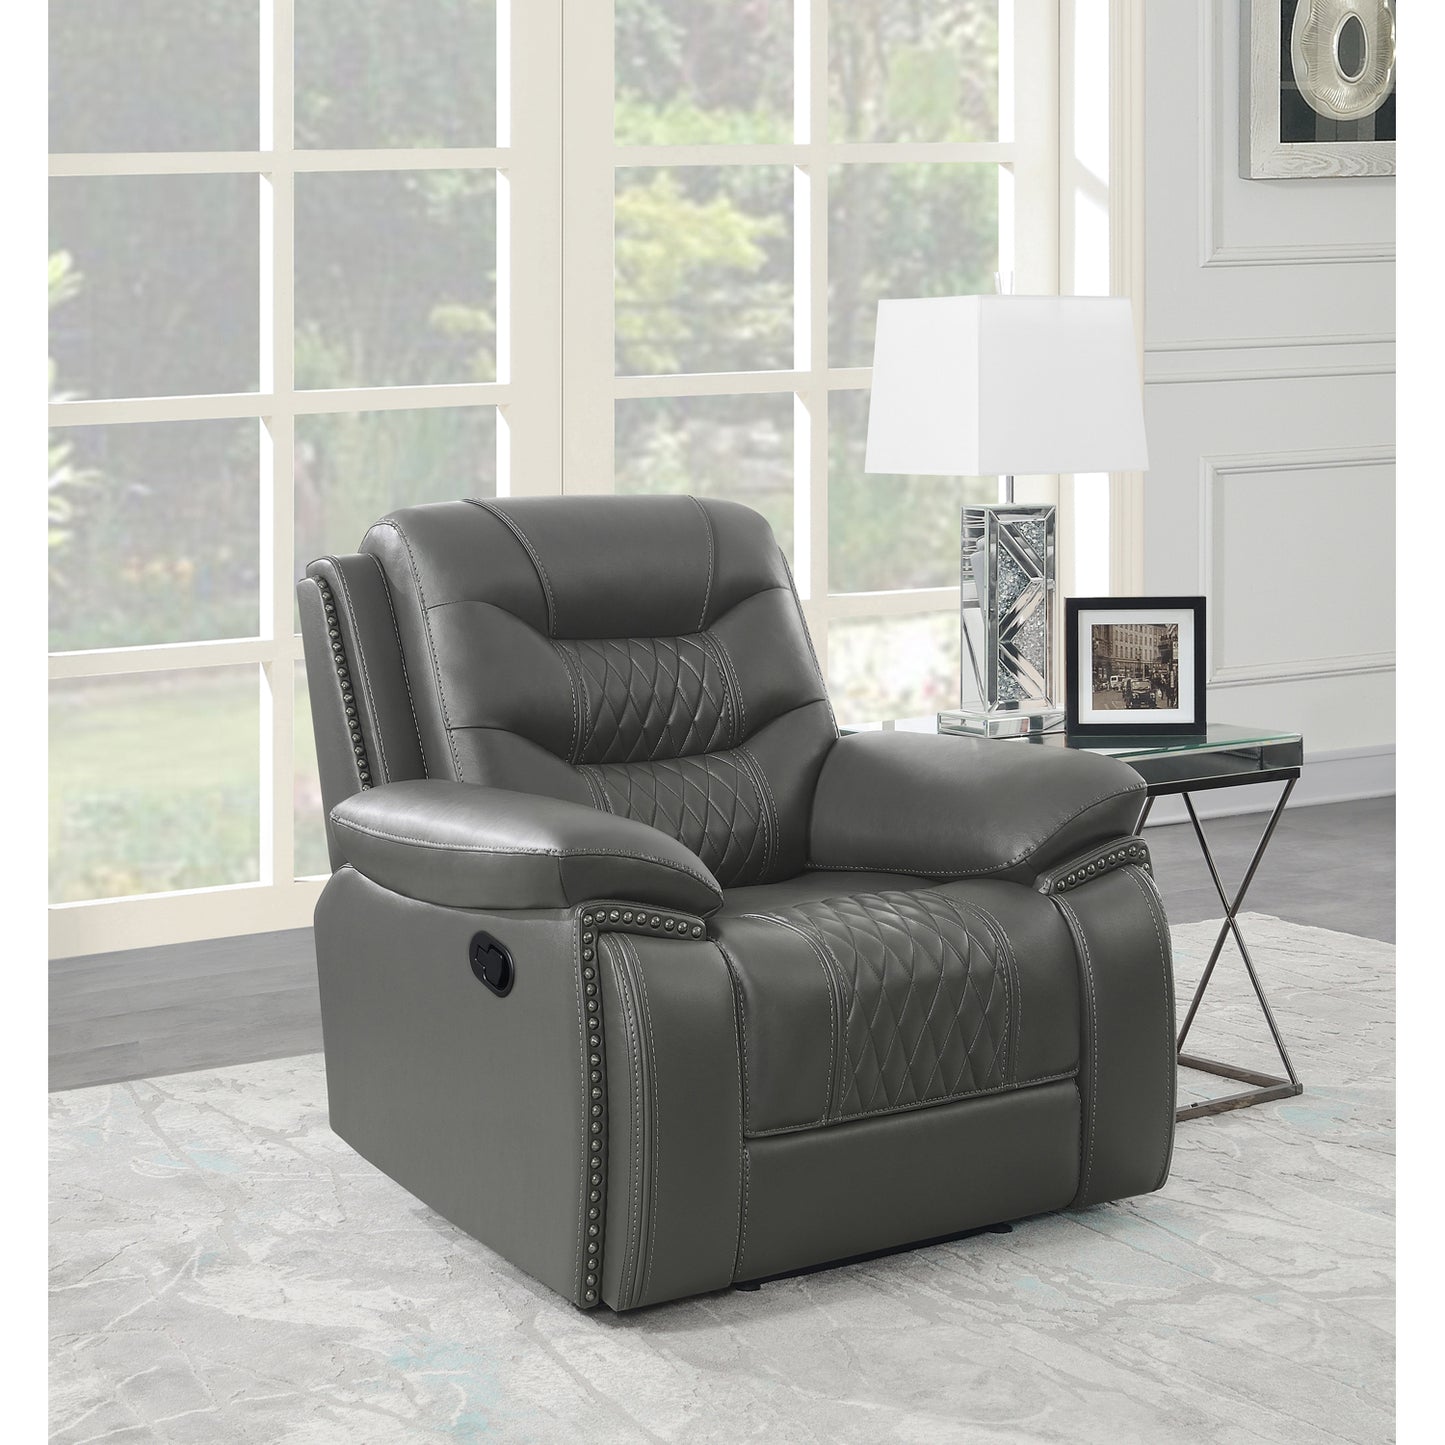 Flamenco Tufted Upholstered Recliner Charcoal